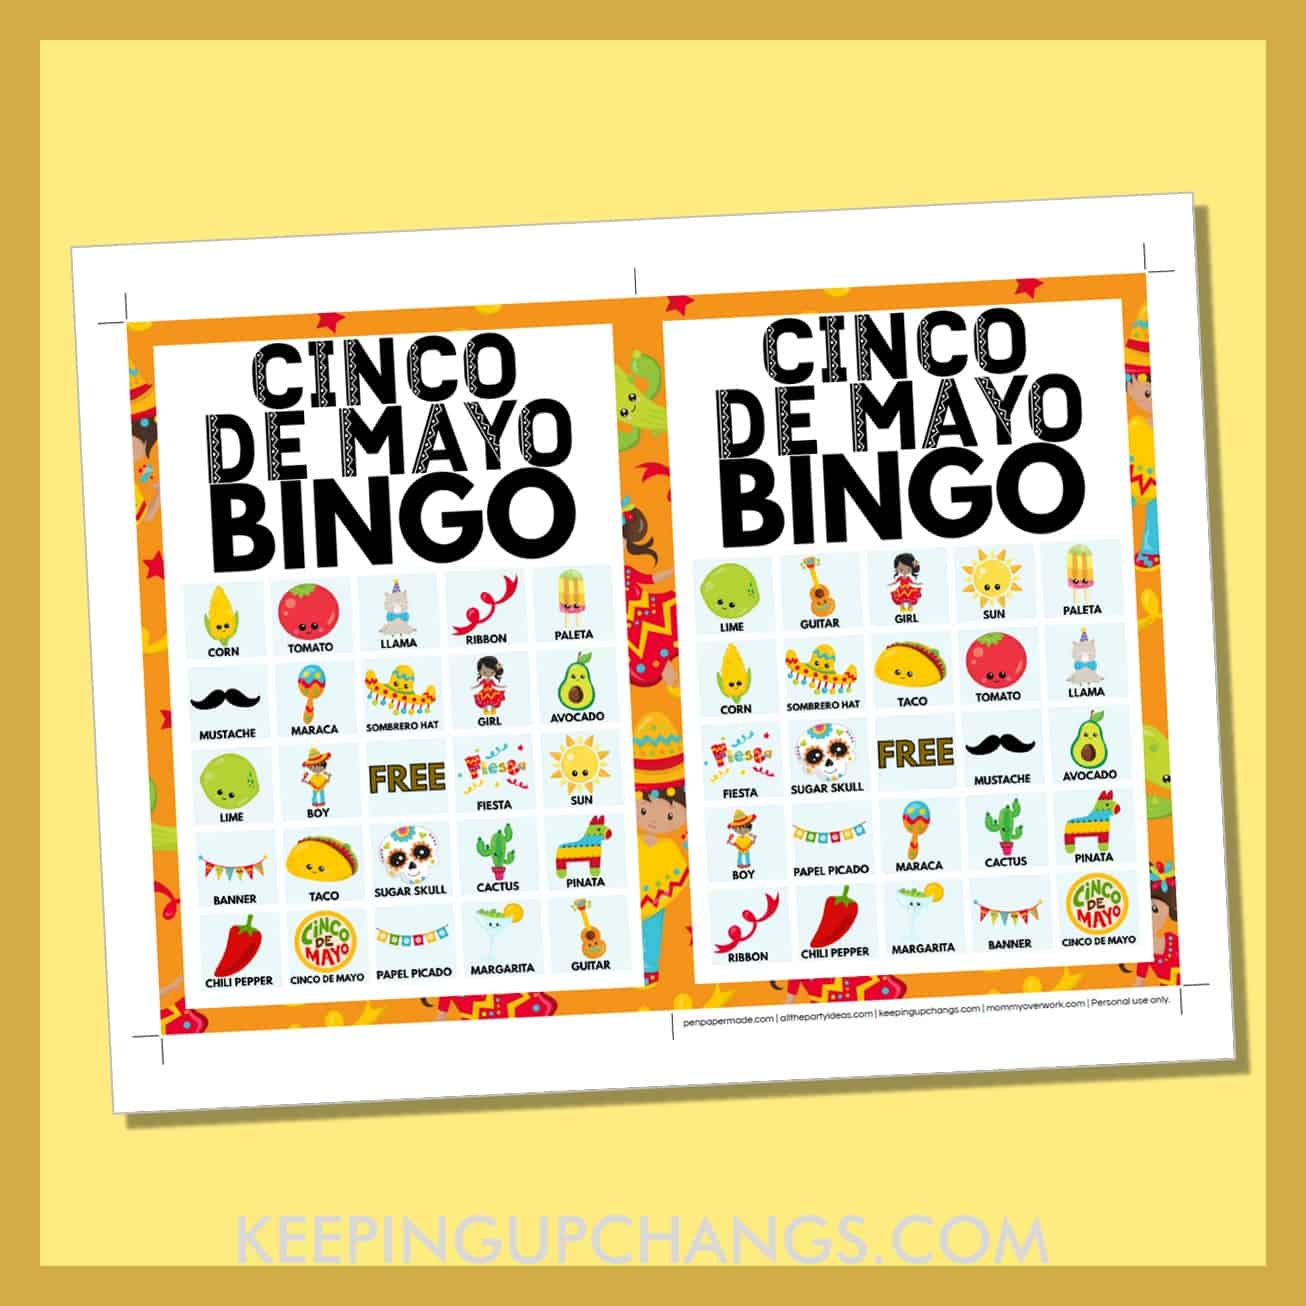 free cinco de mayo bingo card 5x5 5x7 game boards with images and text words.